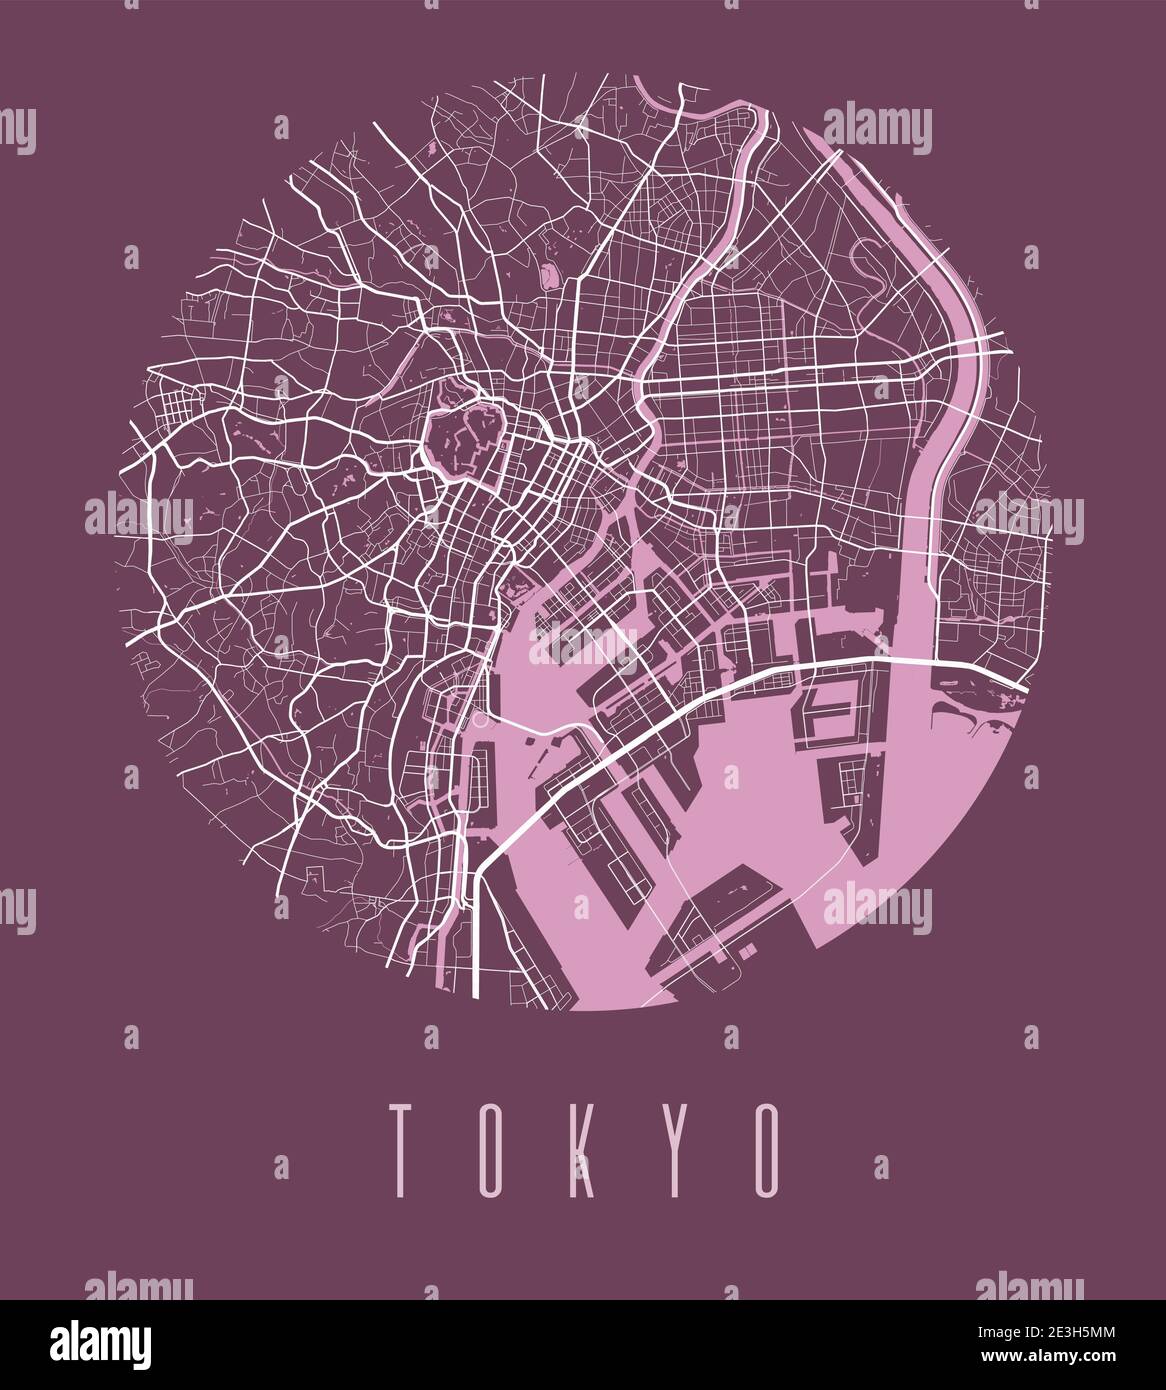 Tokyo map poster. Decorative design street map of Tokyo city. Cityscape aria panorama silhouette aerial view, typography style. Land, river, highways, Stock Vector